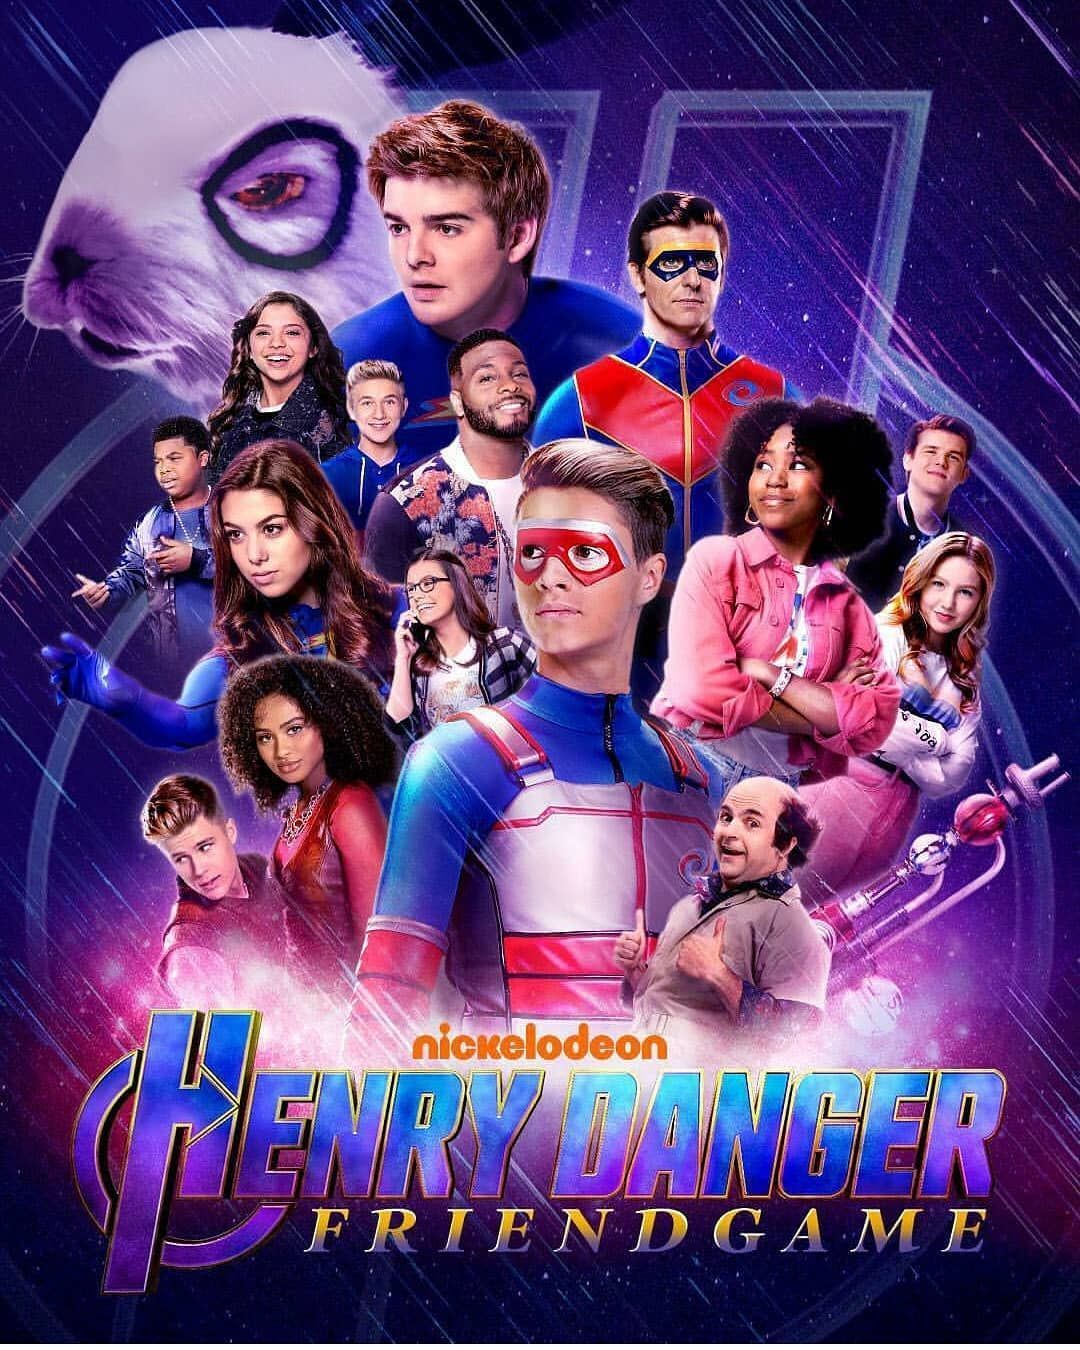 Image may contain: 15 people, people standing and text. Henry danger nickelodeon, Nickelodeon, Childhood tv shows